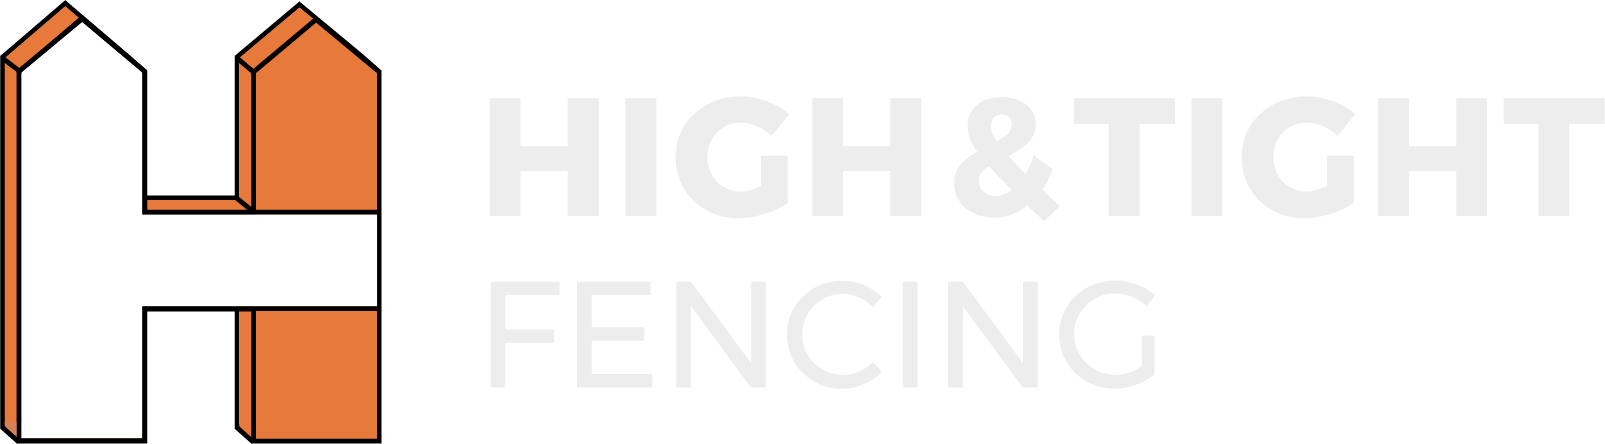 High & Tight Fencing Company